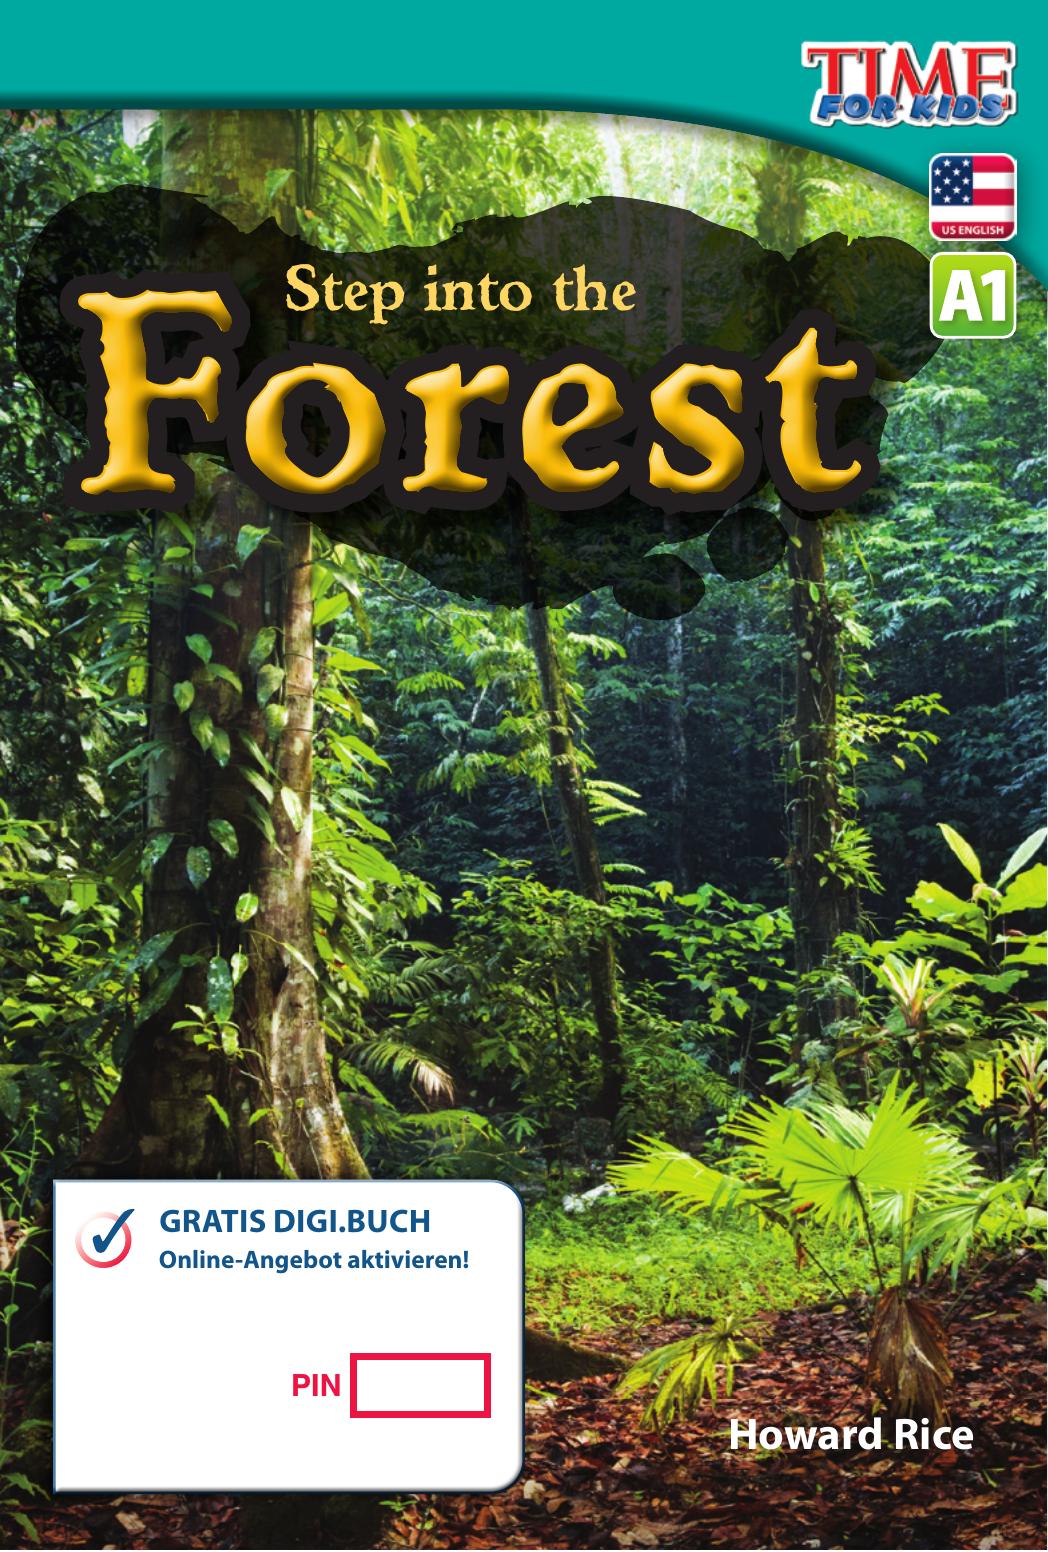 A1 – Step into the Forest